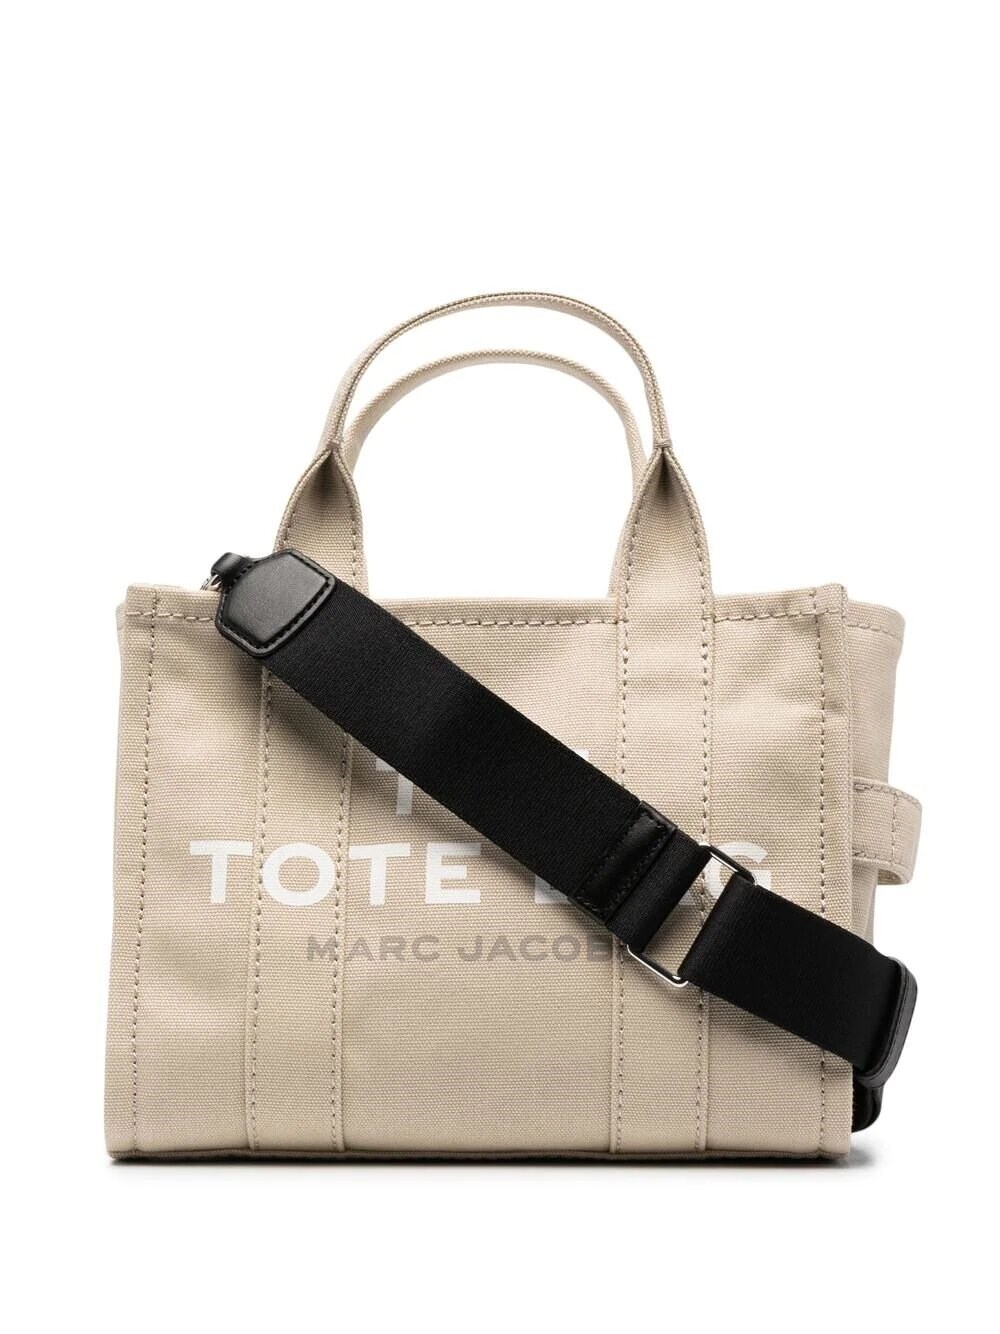 Marc Jacobs The Mini Tote In Beige